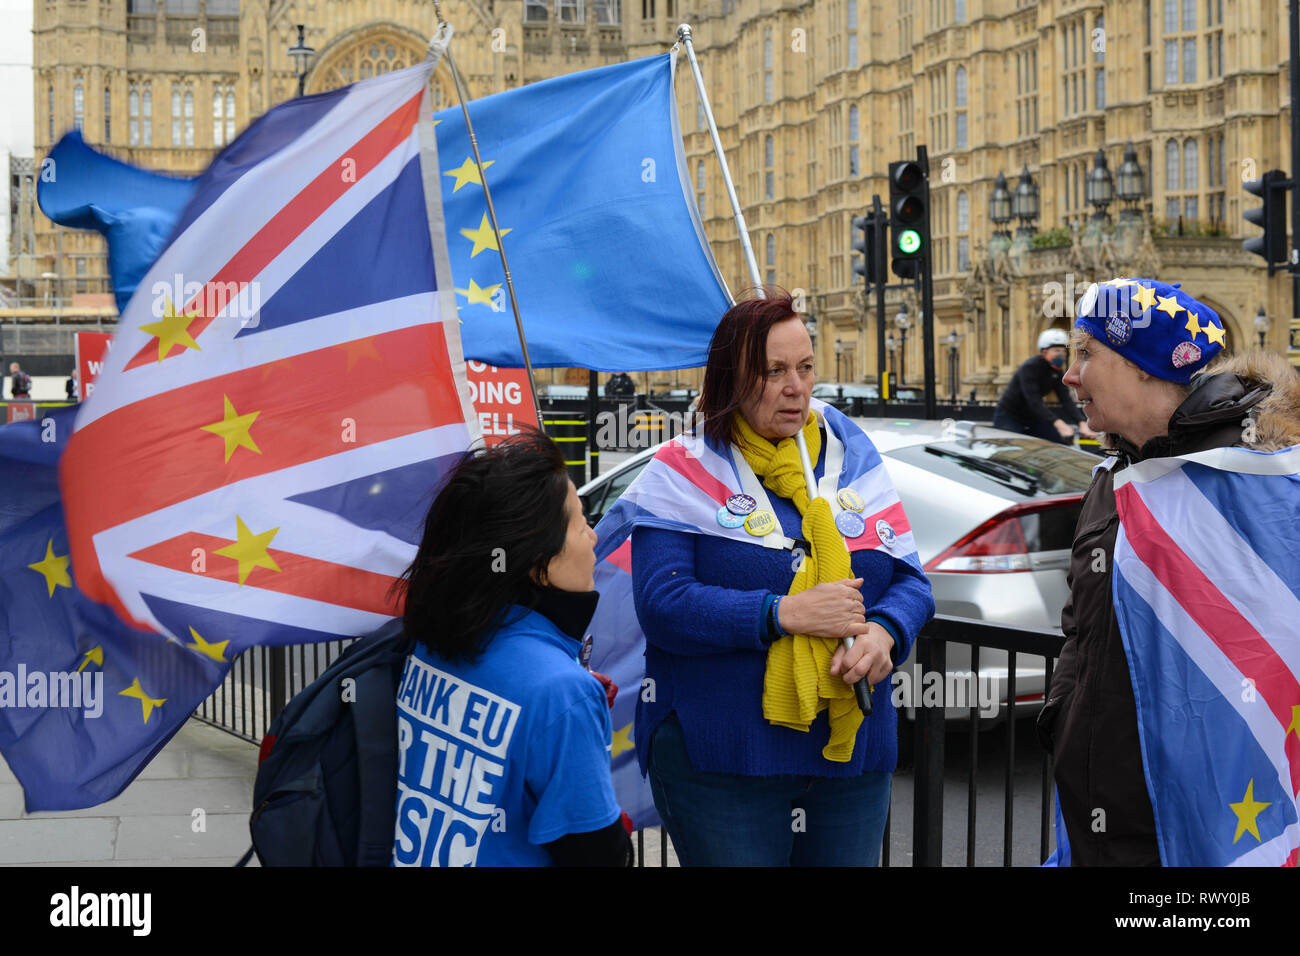 Westminster, London, UK. 7th Mar 2019. Anti-Brexit Activists demonstrate opposite Palace Of Westminster in London. Credit: Thomas Krych/Alamy Live News Stock Photo